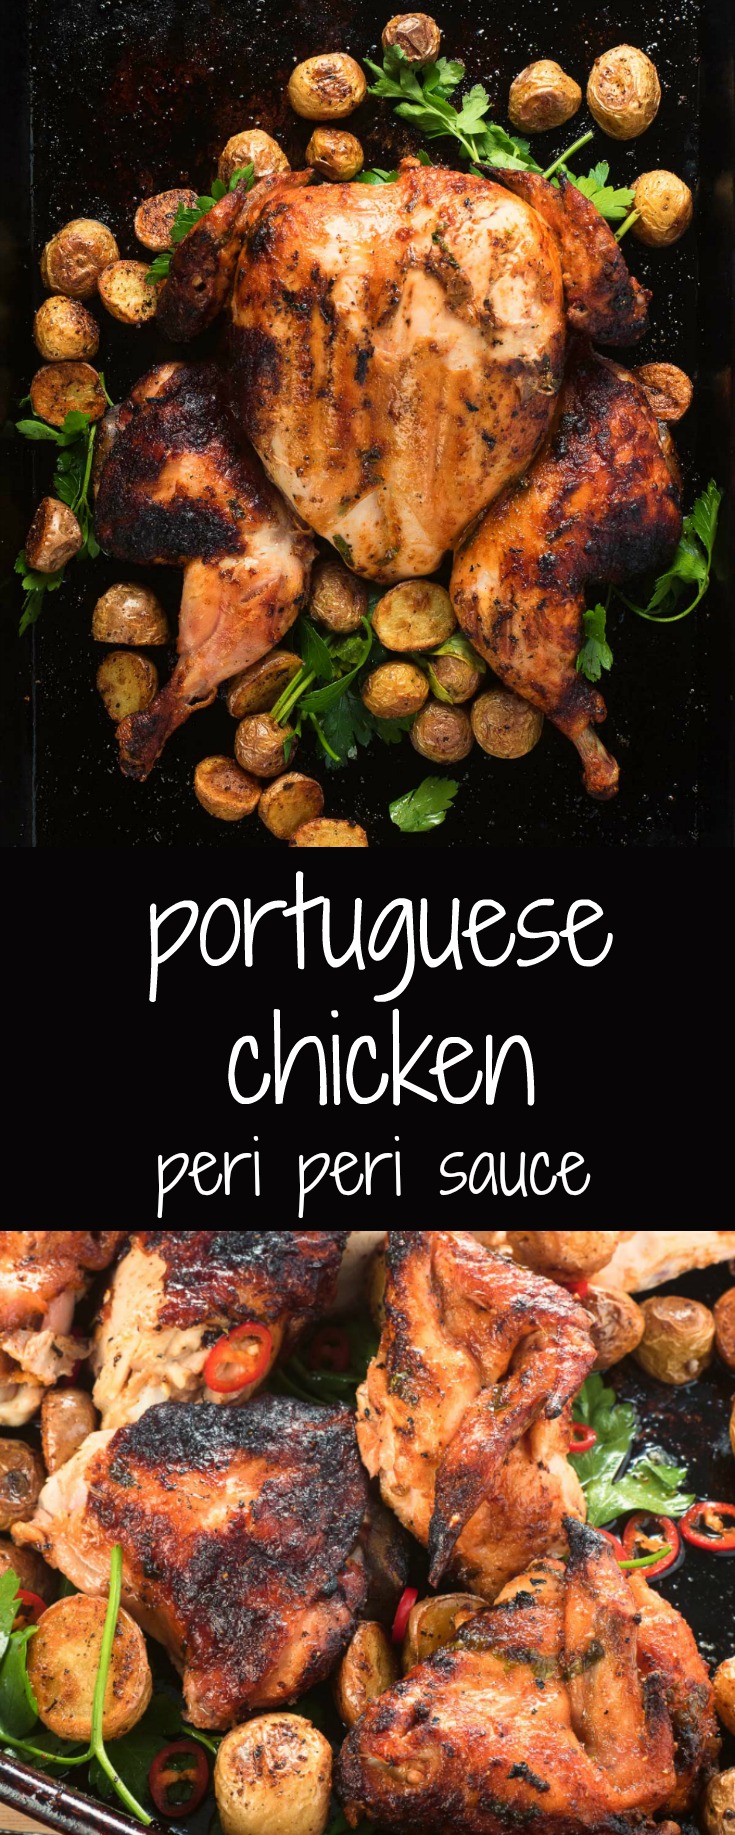 Spicy, lemony, and smoky flavours come together in Portuguese grilled chicken